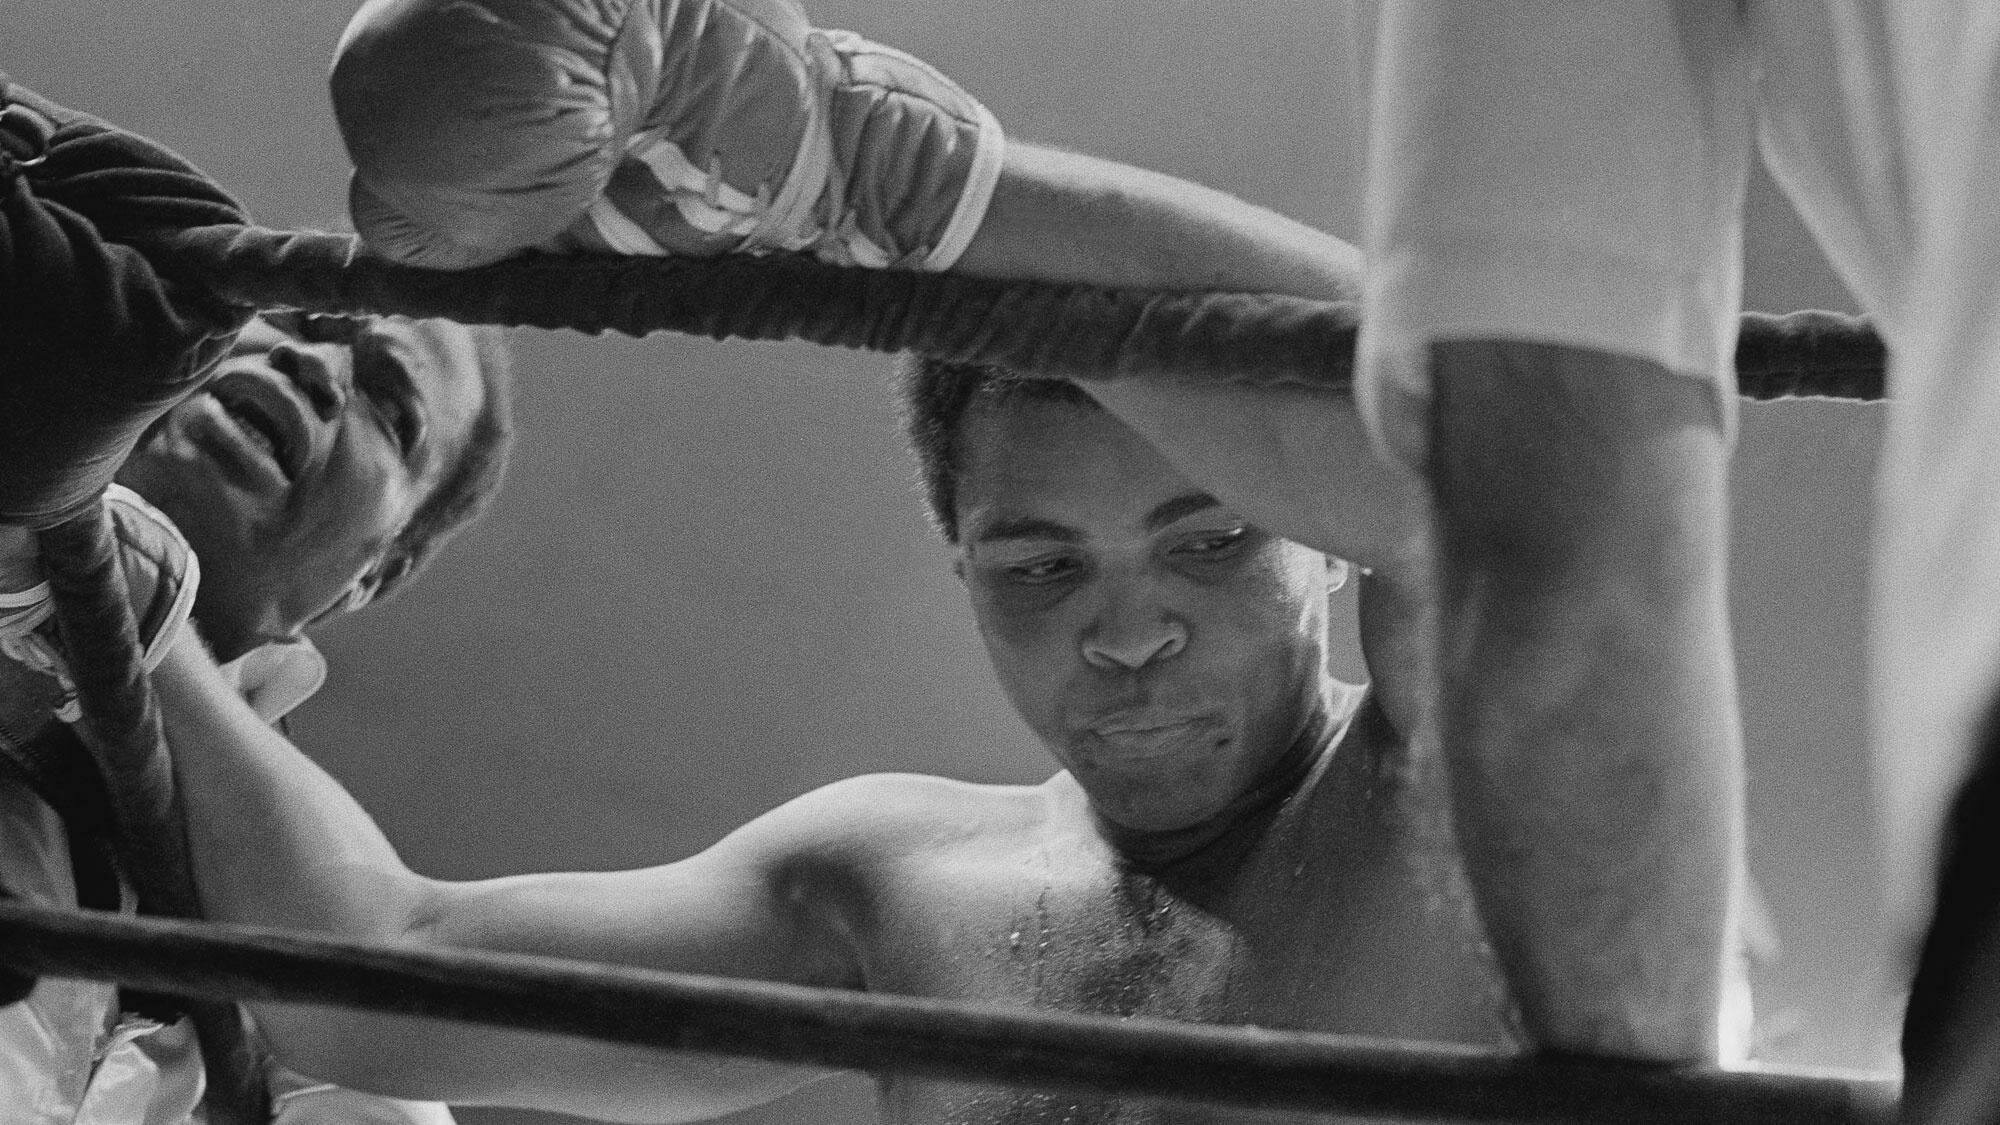 Muhammad Ali S1E4 Round Four: The Spell Remains (1974-2016)